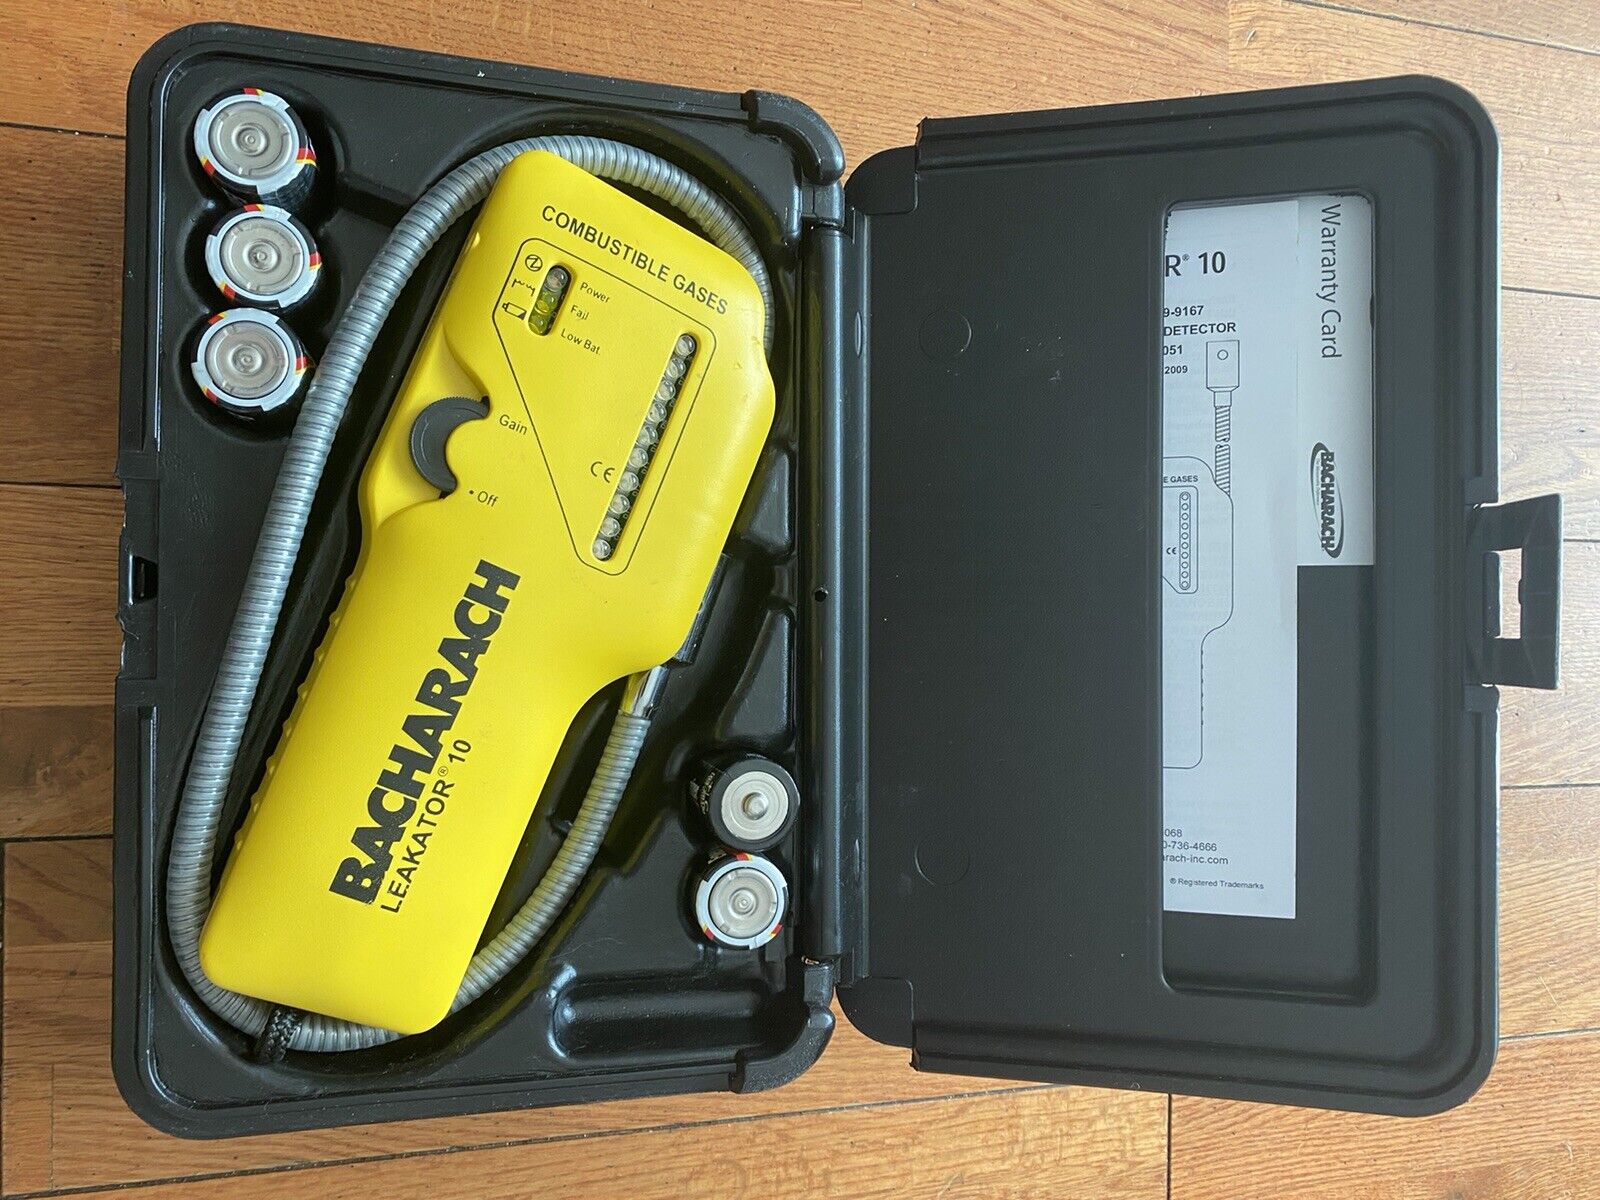 BACHARACH LEAKATOR 10 COMBUSTIBLE GAS LEAK DETECTOR 19-7051 - GREAT CONDITION